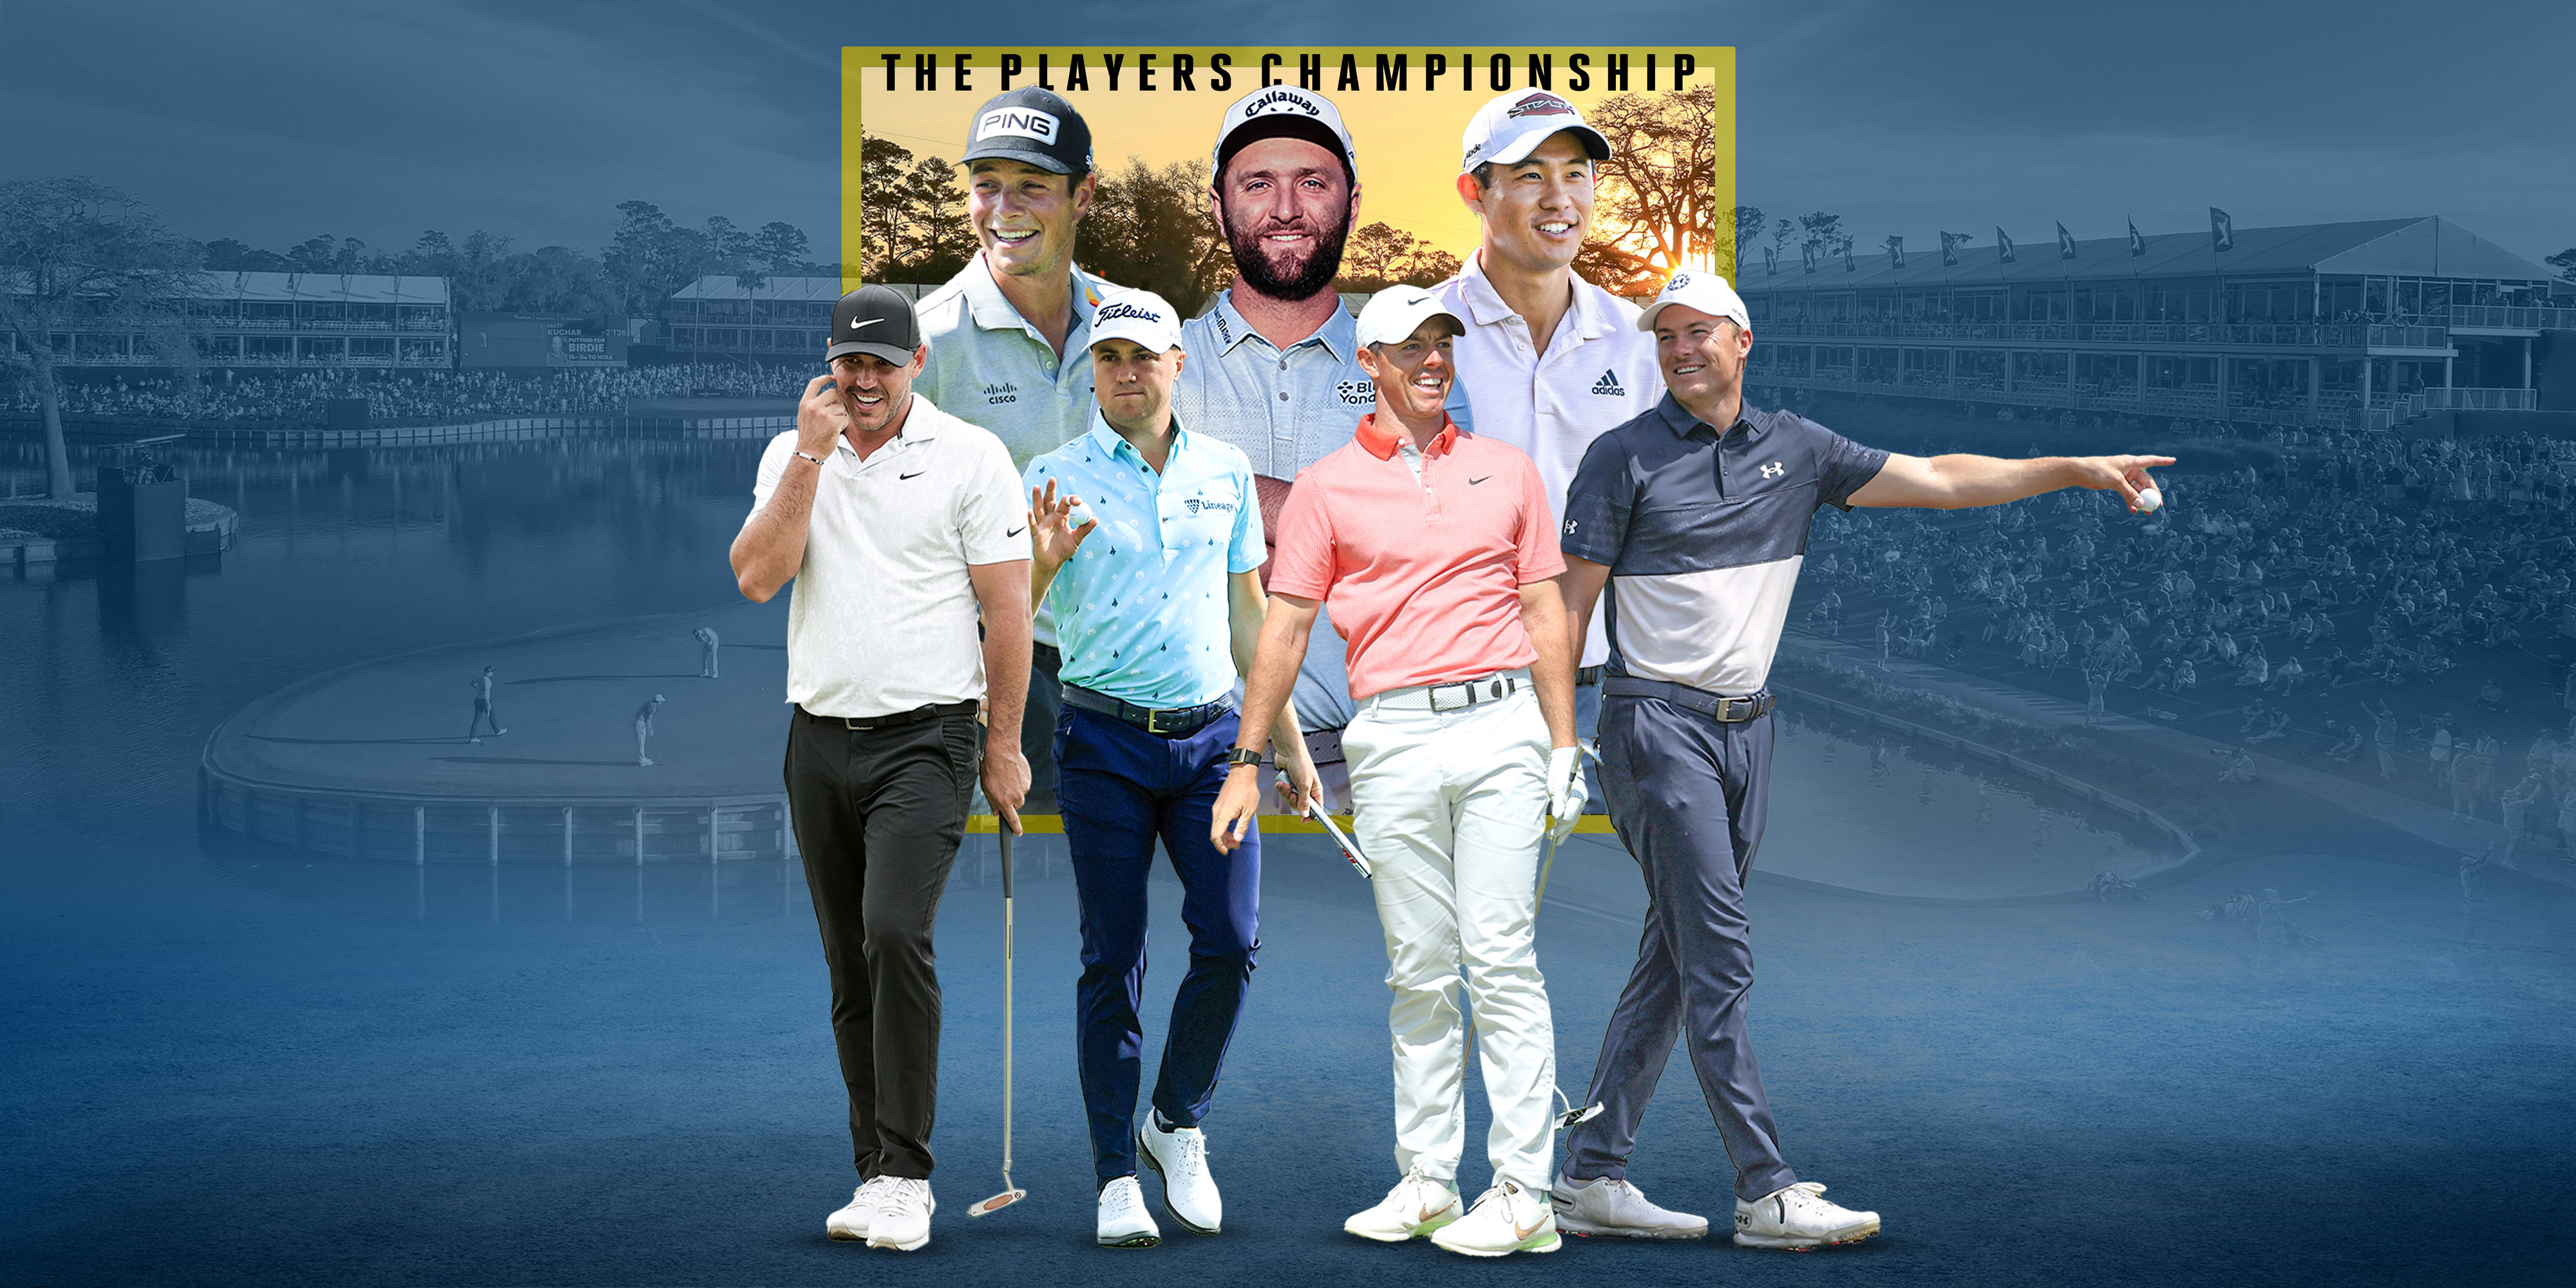 Players 2022: The top 100 golfers competing at TPC Sawgrass, ranked, Golf  News and Tour Information